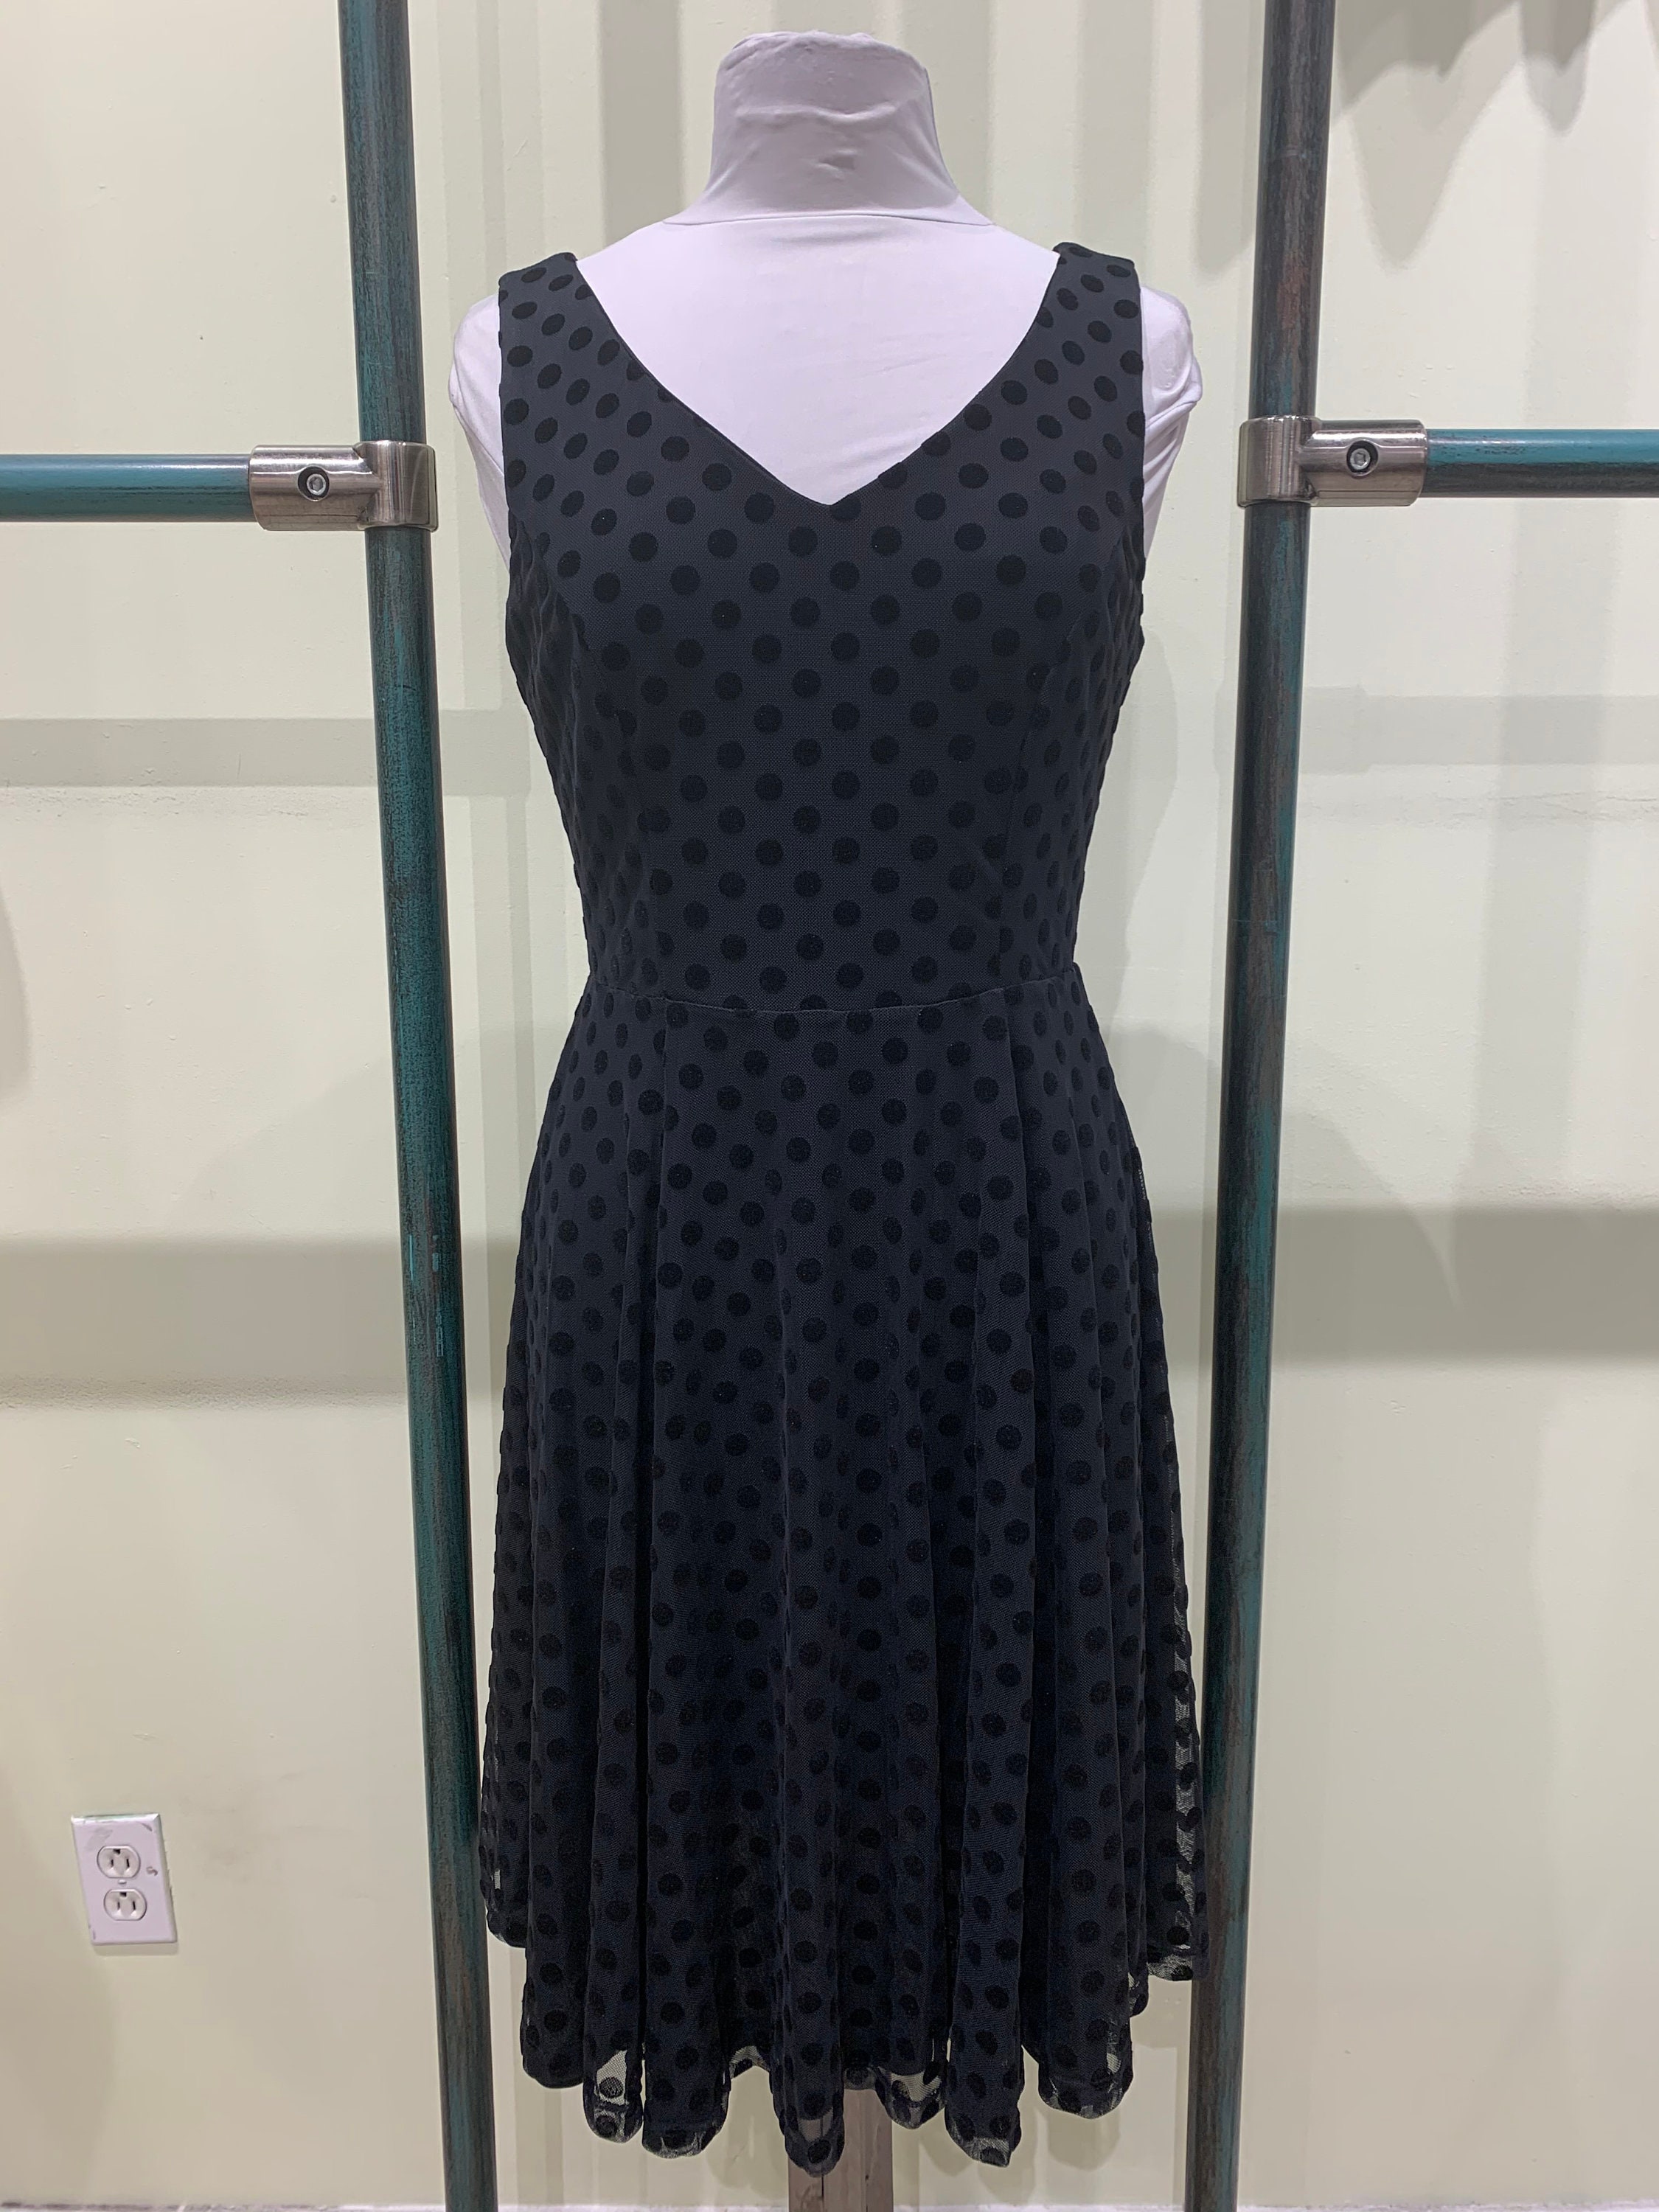 Ixia Solid Black Polka Dot Lined V-neck Fit and Flare Dress | Etsy